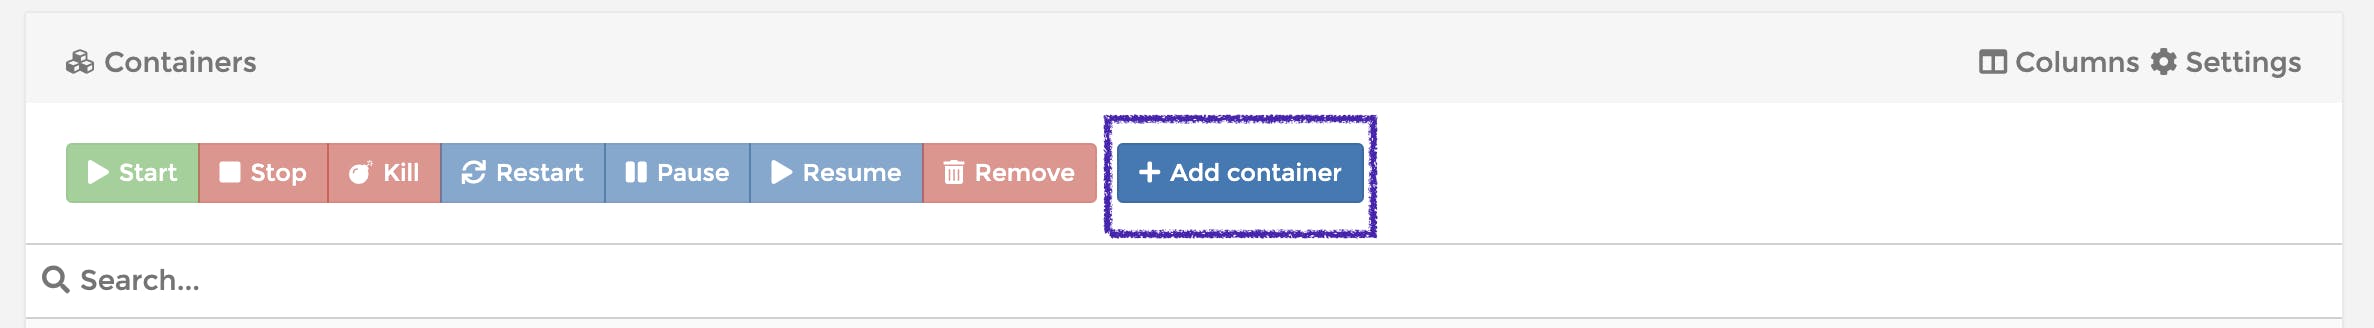 Add container option